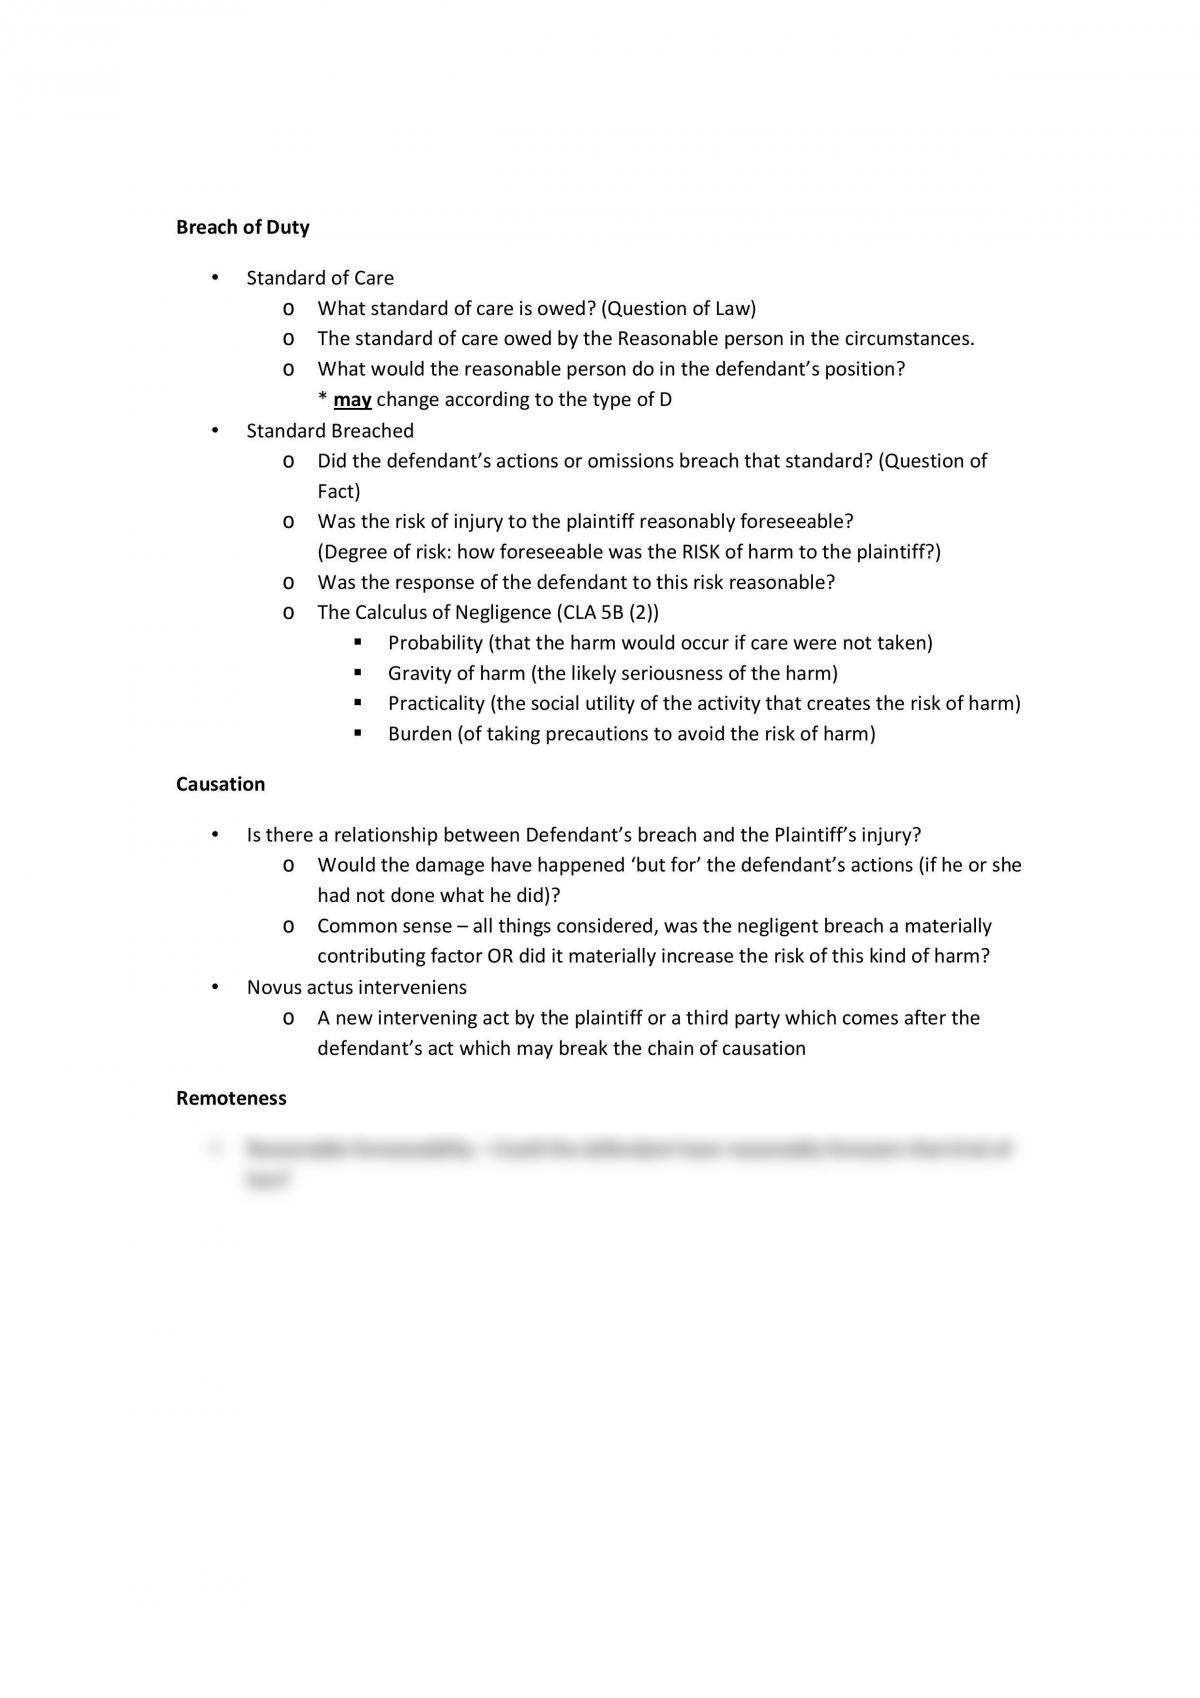 Outline Of Test In Breach, Causation And Remoteness - Page 1